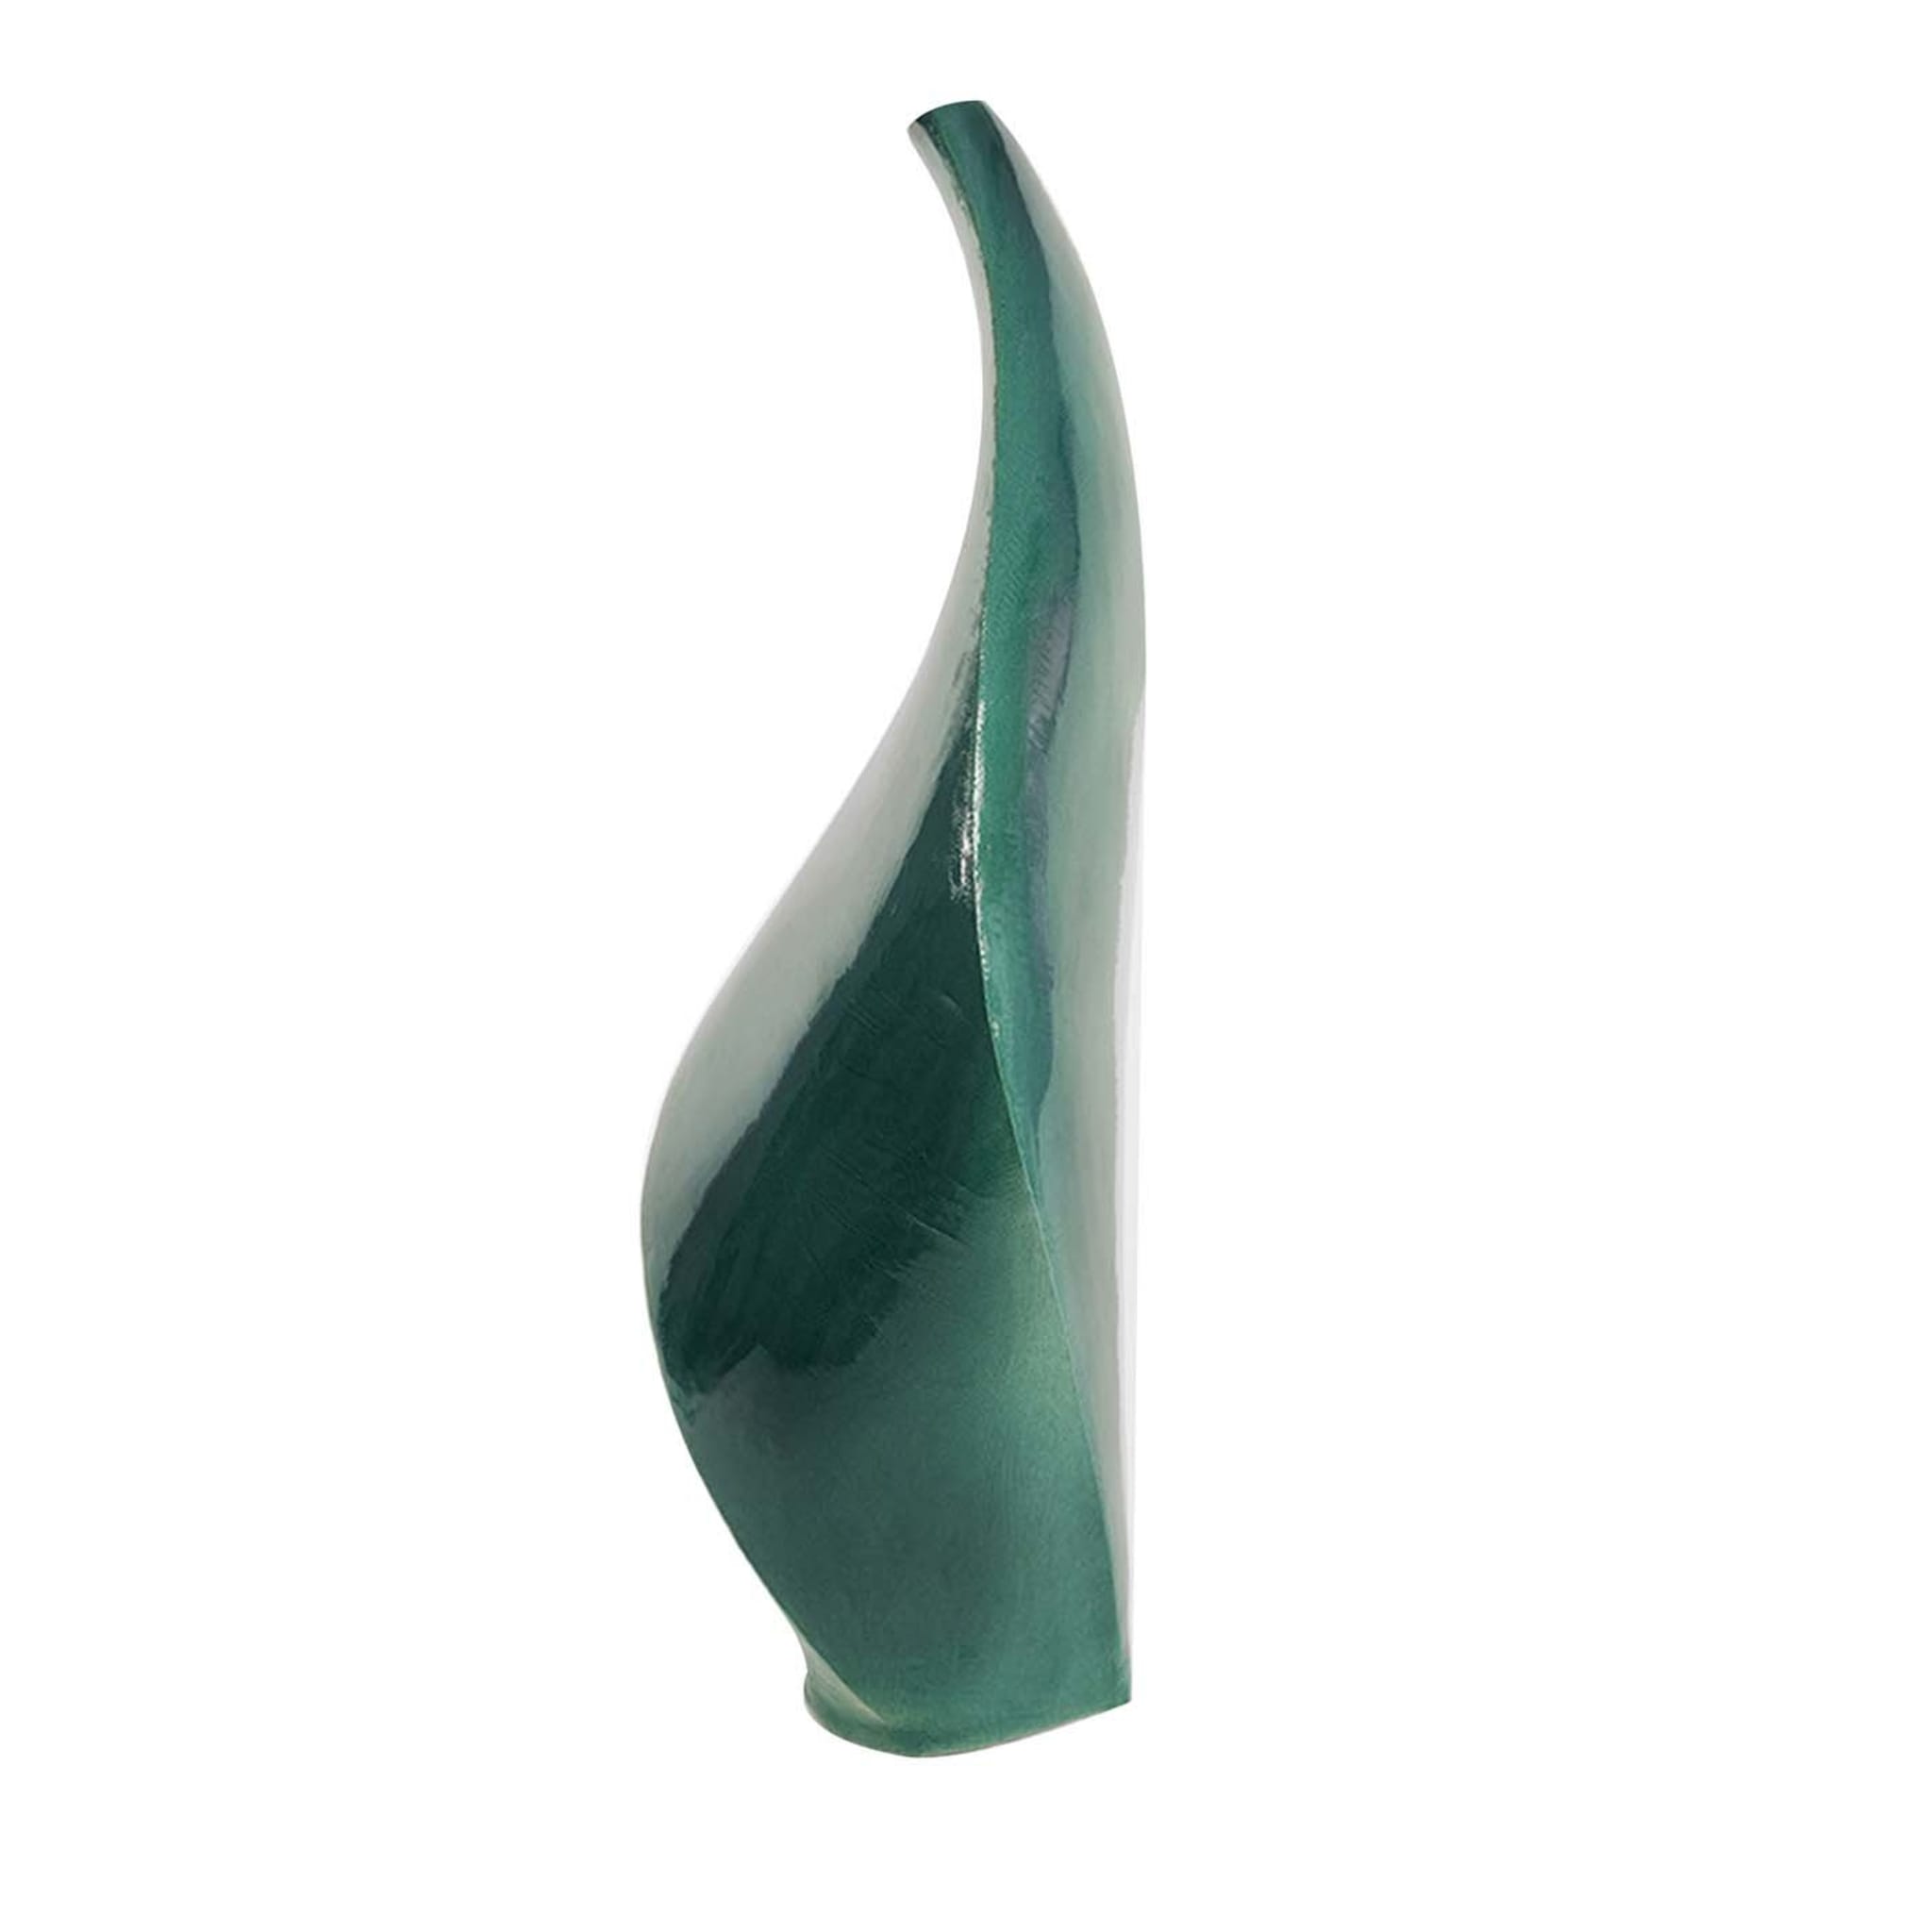 Demeter Green Sculptural Vase with Curved Lip #1 - Main view